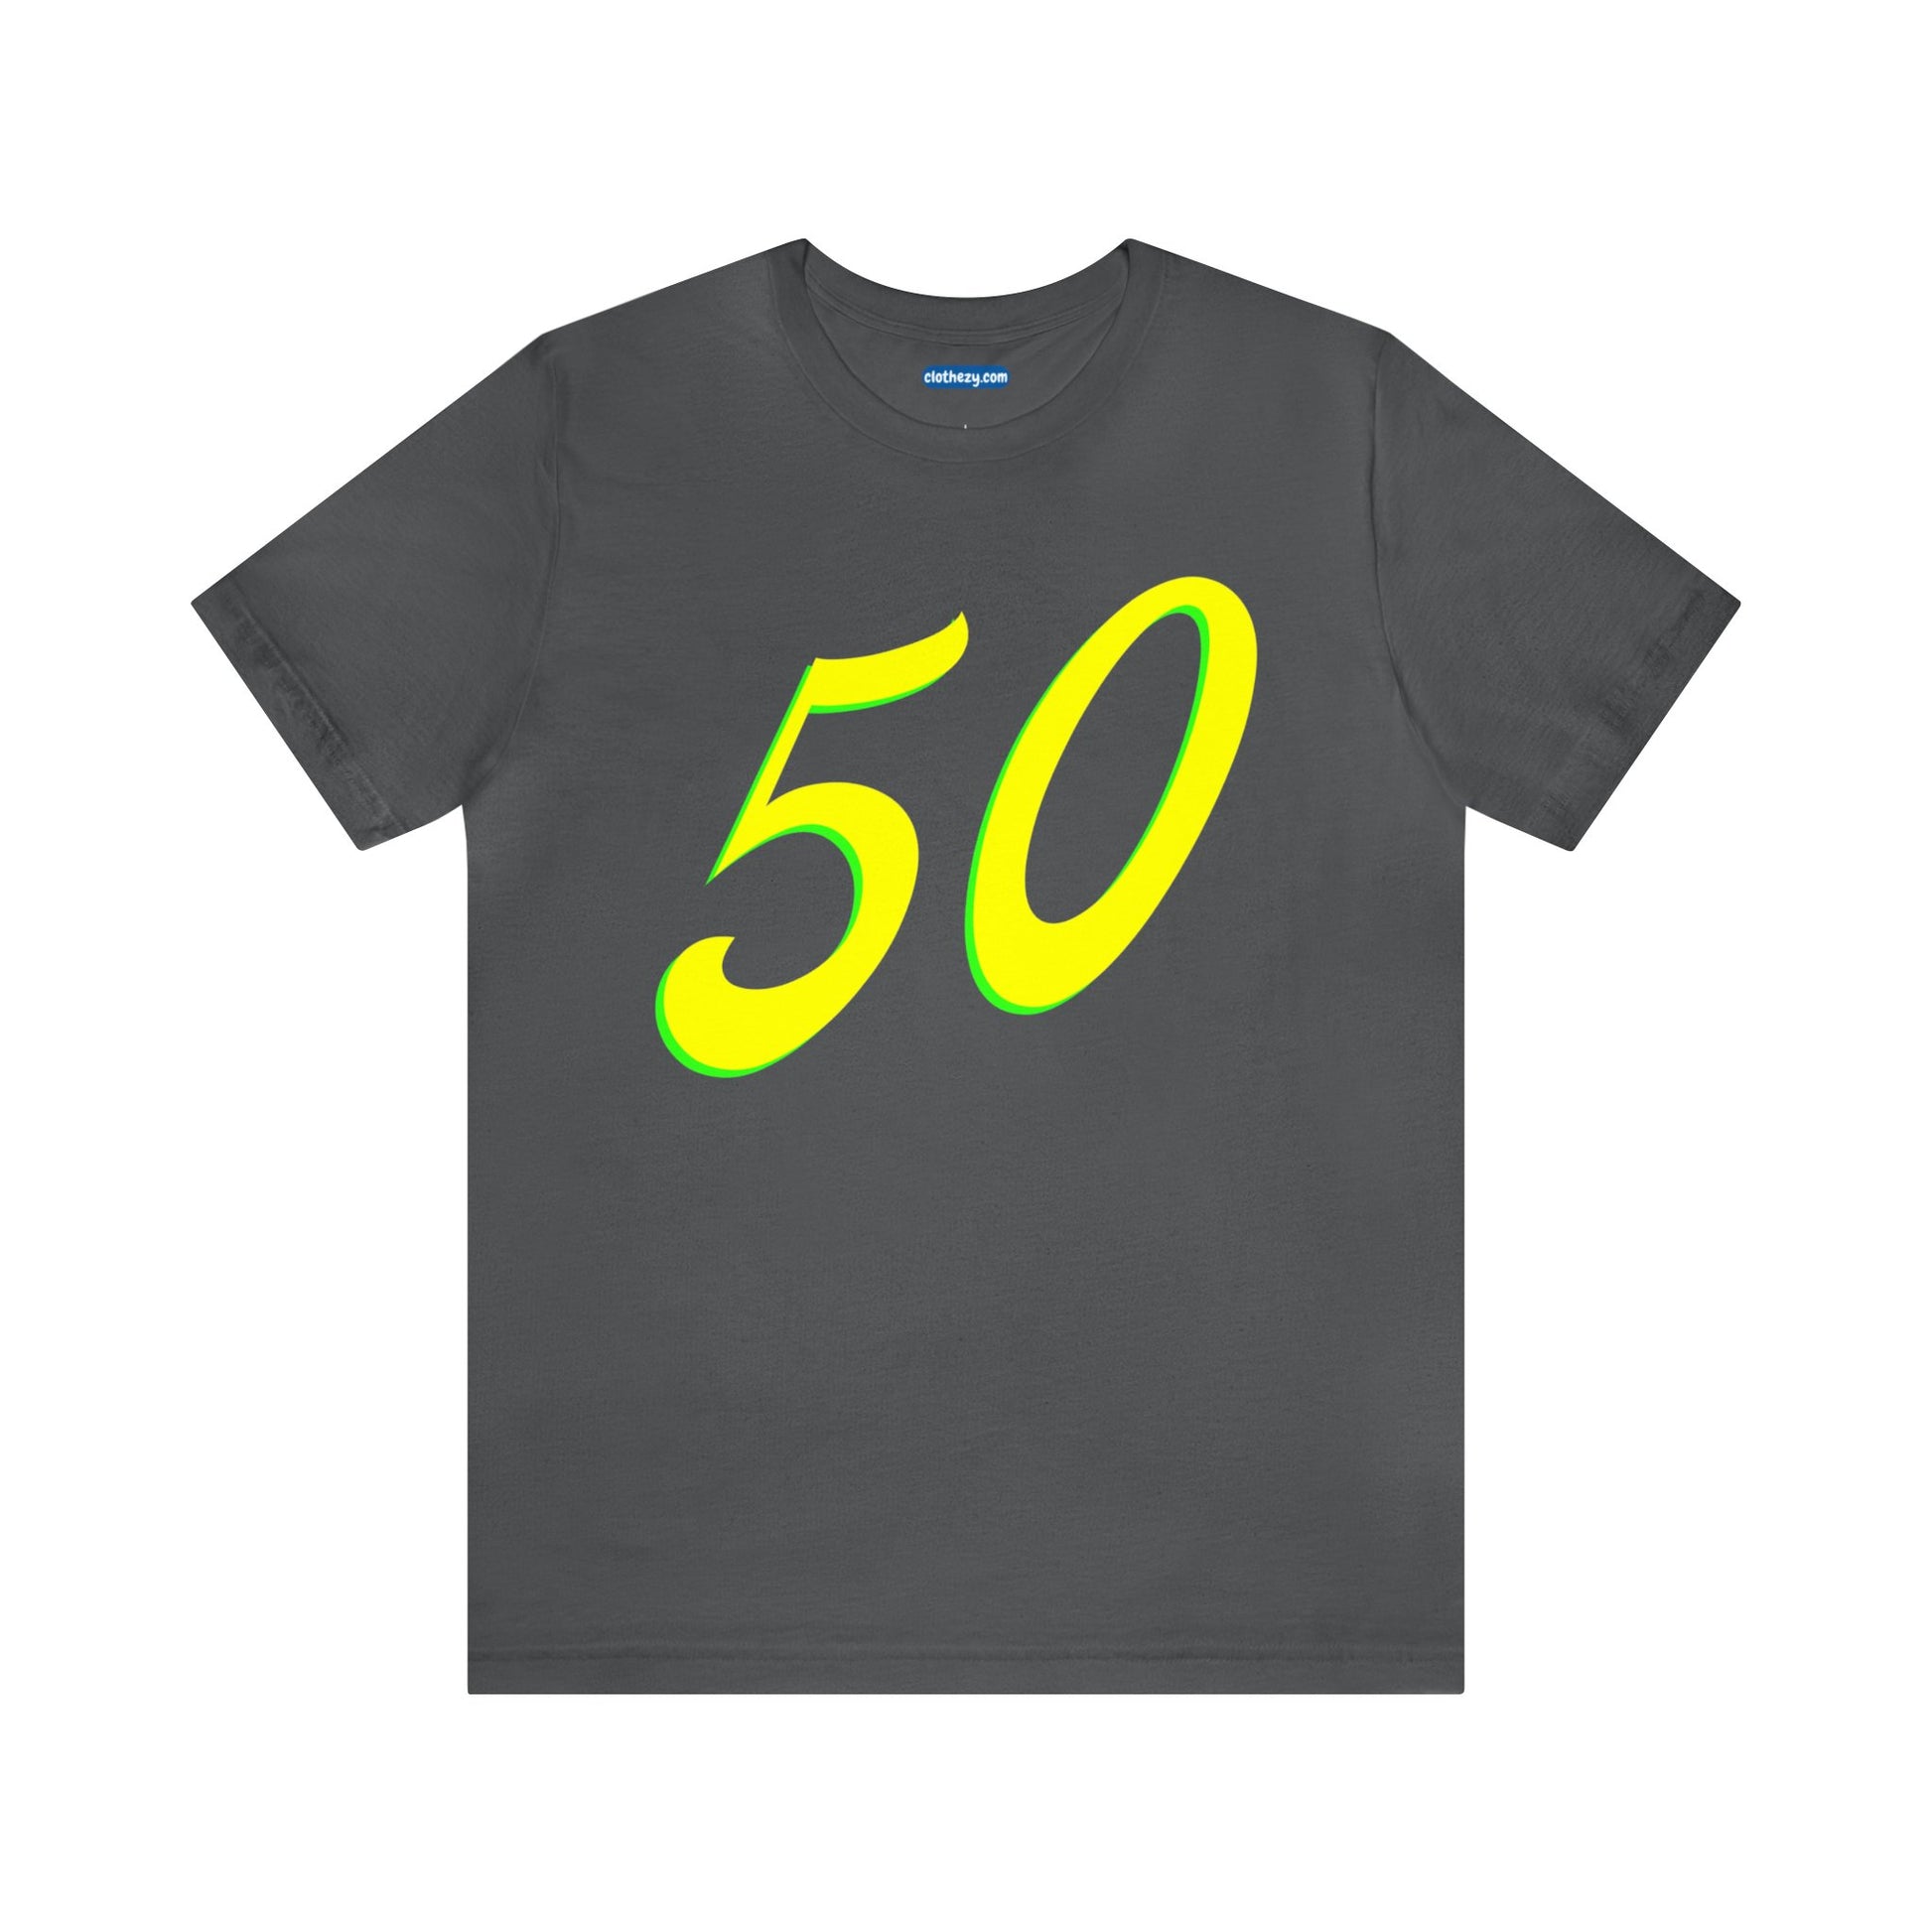 Number 50 Design - Soft Cotton Tee for birthdays and celebrations, Gift for friends and family, Multiple Options by clothezy.com in Black Size Small - Buy Now